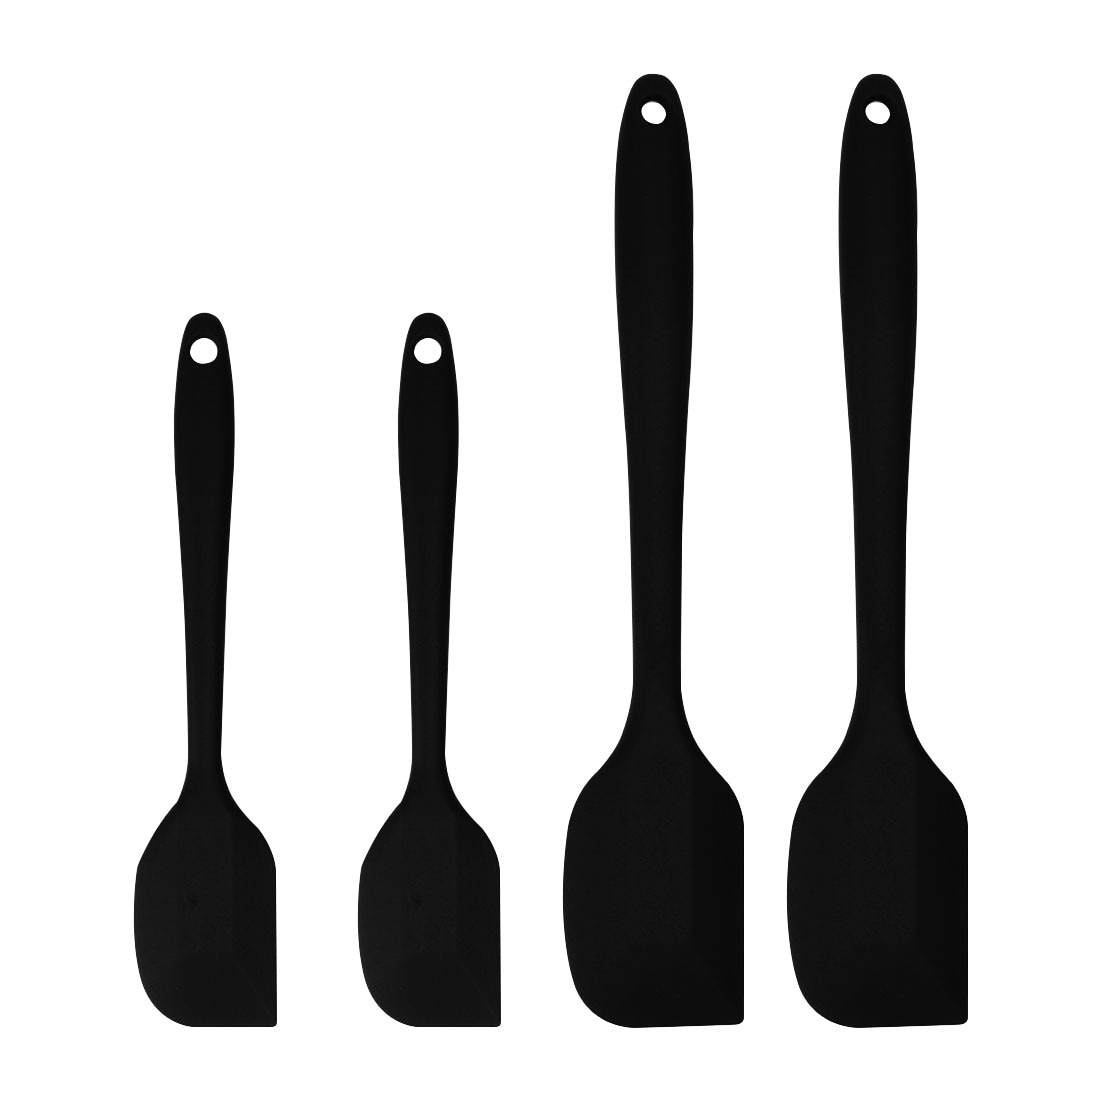 https://ak1.ostkcdn.com/images/products/is/images/direct/6ccb0a0d90693d547ab5f266ea8c274c9ea1dc83/4-Pcs-Silicone-Spatula-Set-Heat-Resistant-Non-Stick-for-Cooking.jpg